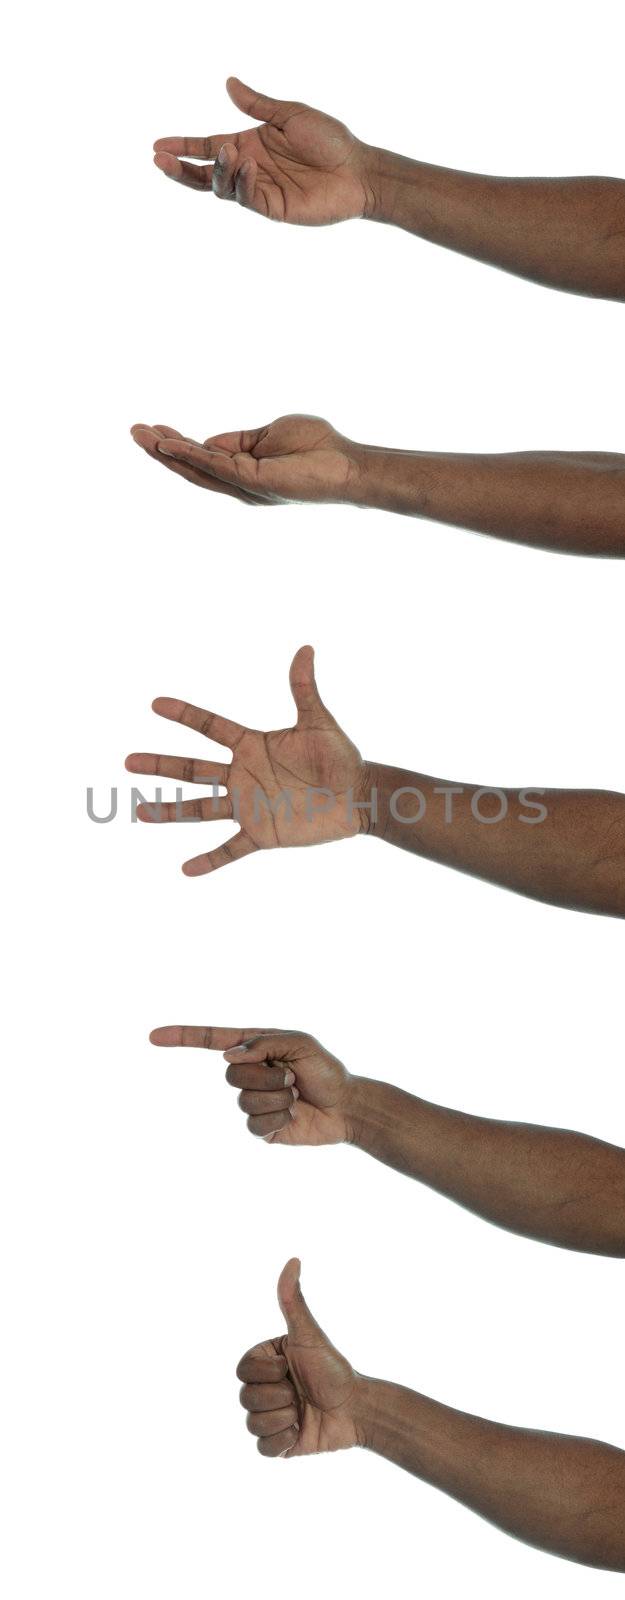 A dark-skinned human hand with several gestures. All on white background.